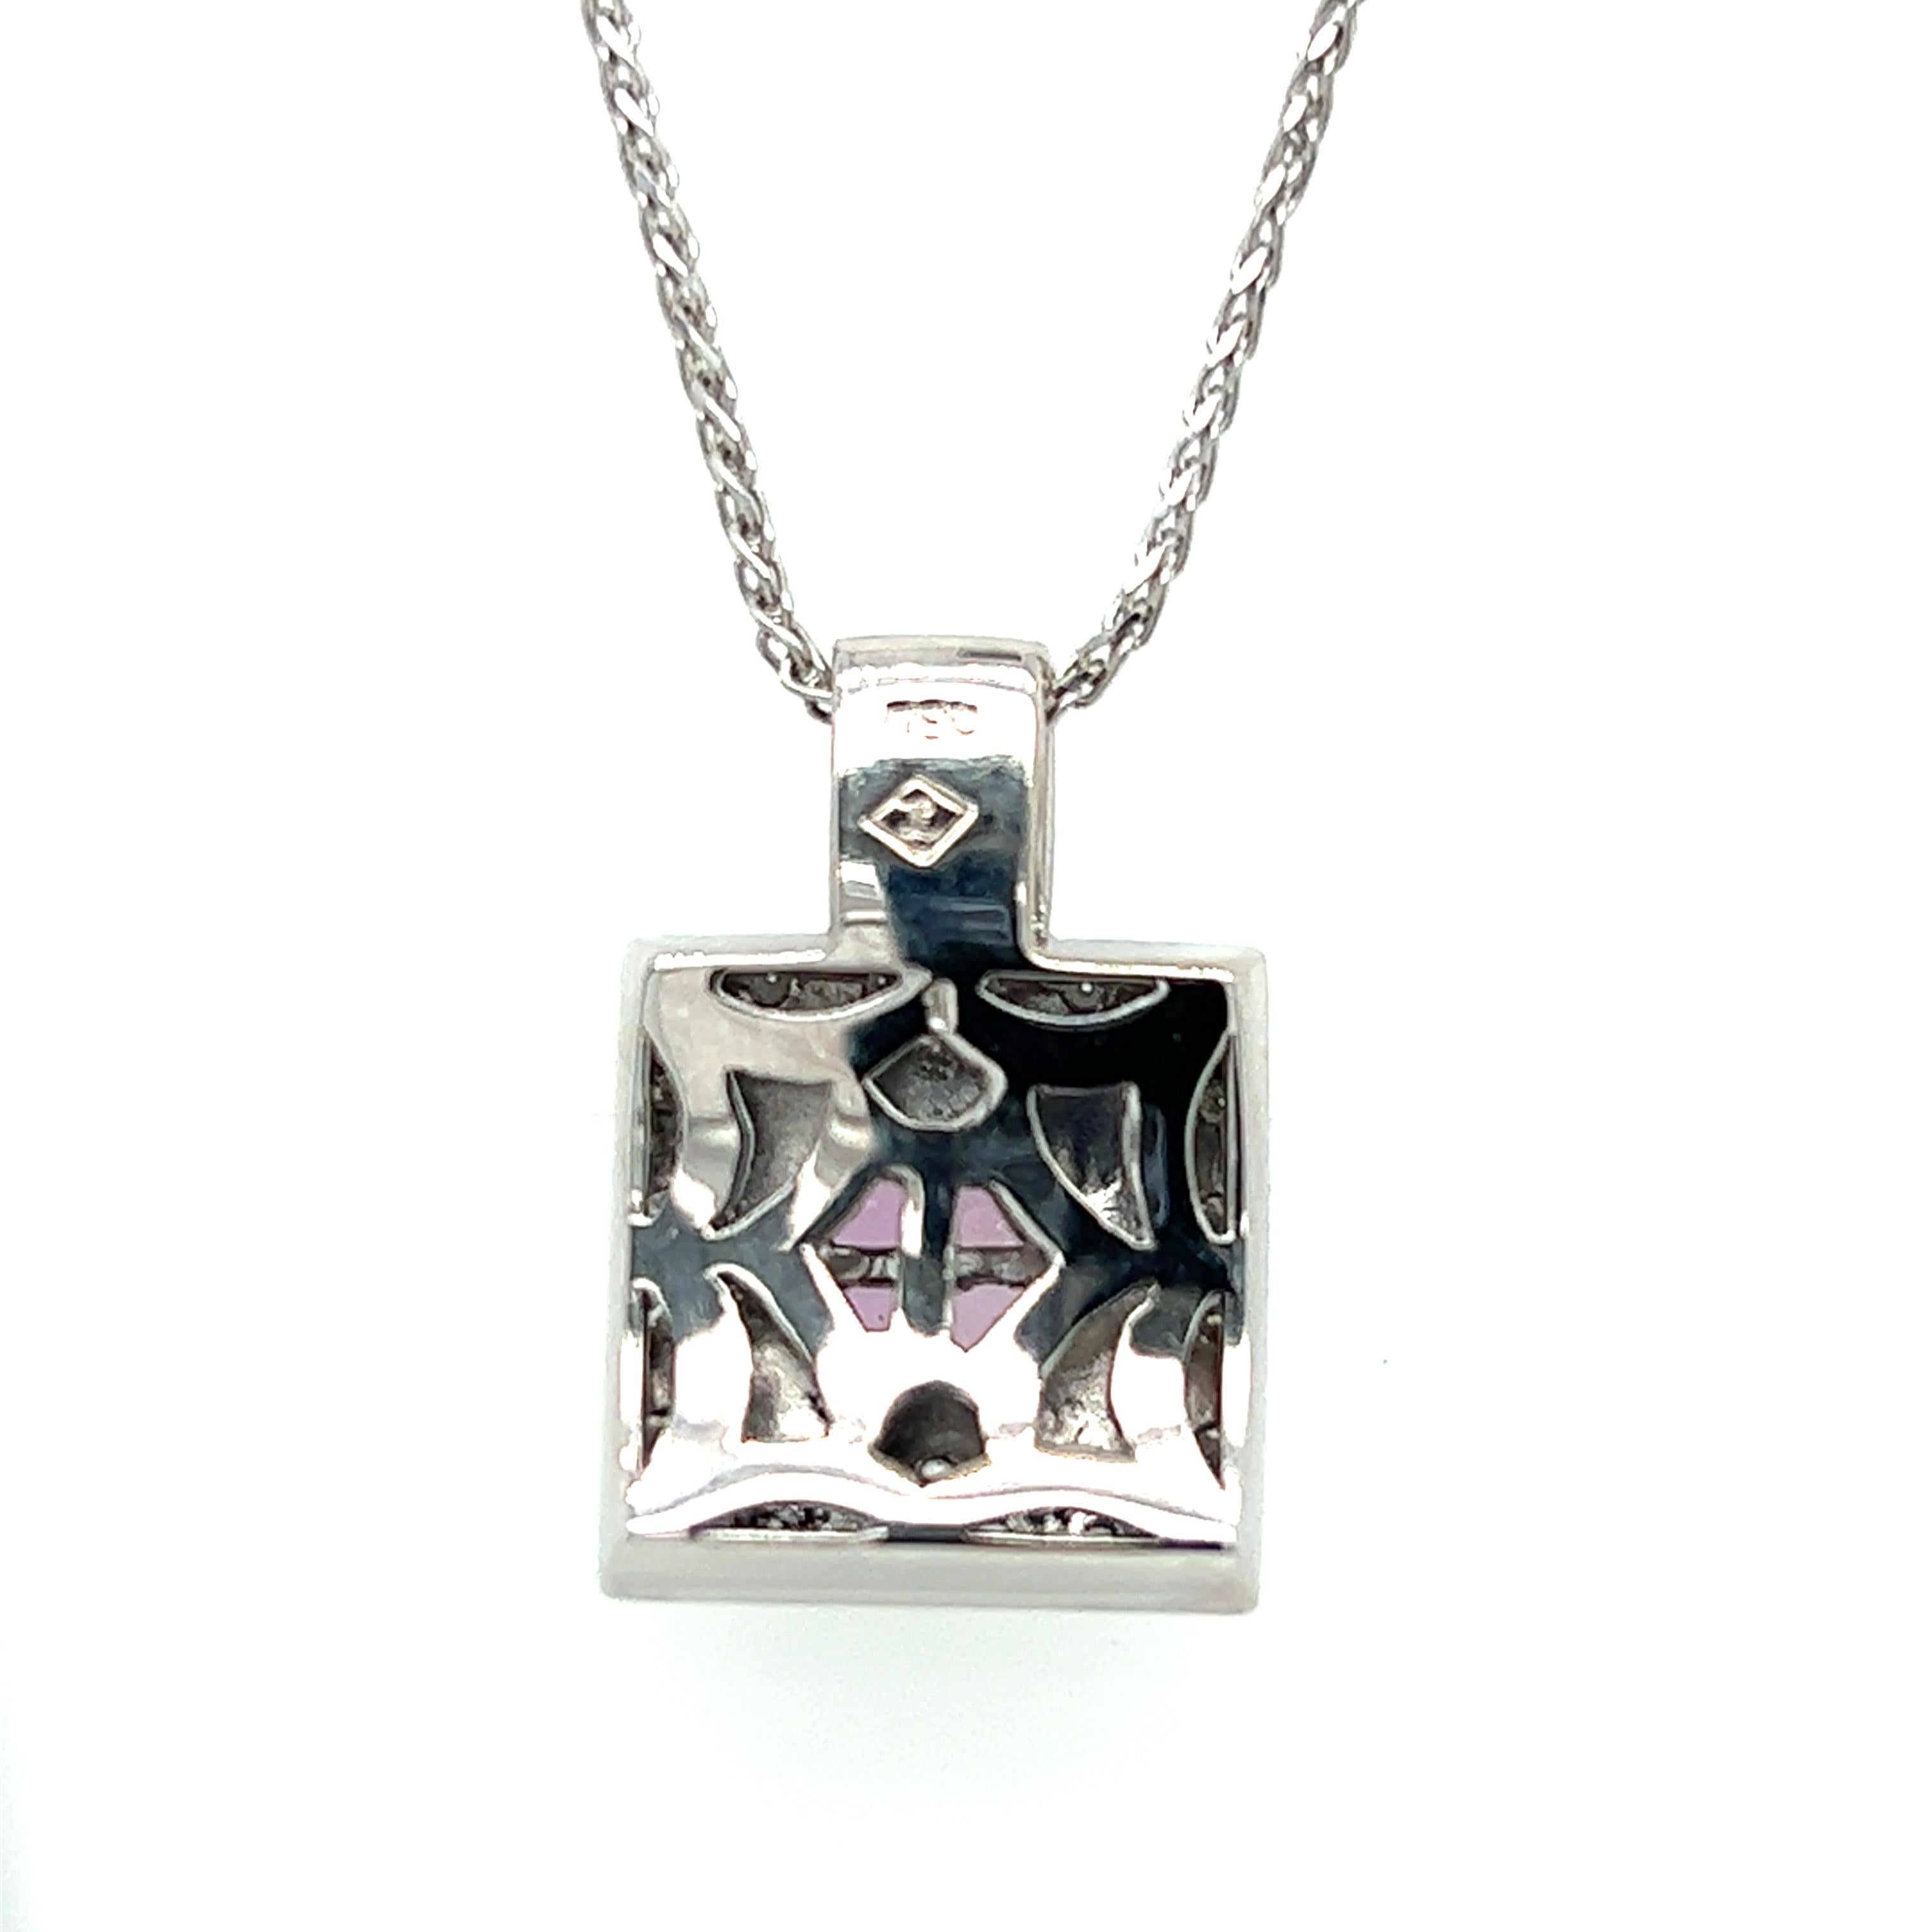 One 18-karat white gold square design pendant, set with four (4) 2.75mm square cut pink sapphires, and forty-eight (48) brilliant cut diamonds, approximately 1.00-carat total weight with matching H/I color and SI1 clarity.  The pendant is suspended